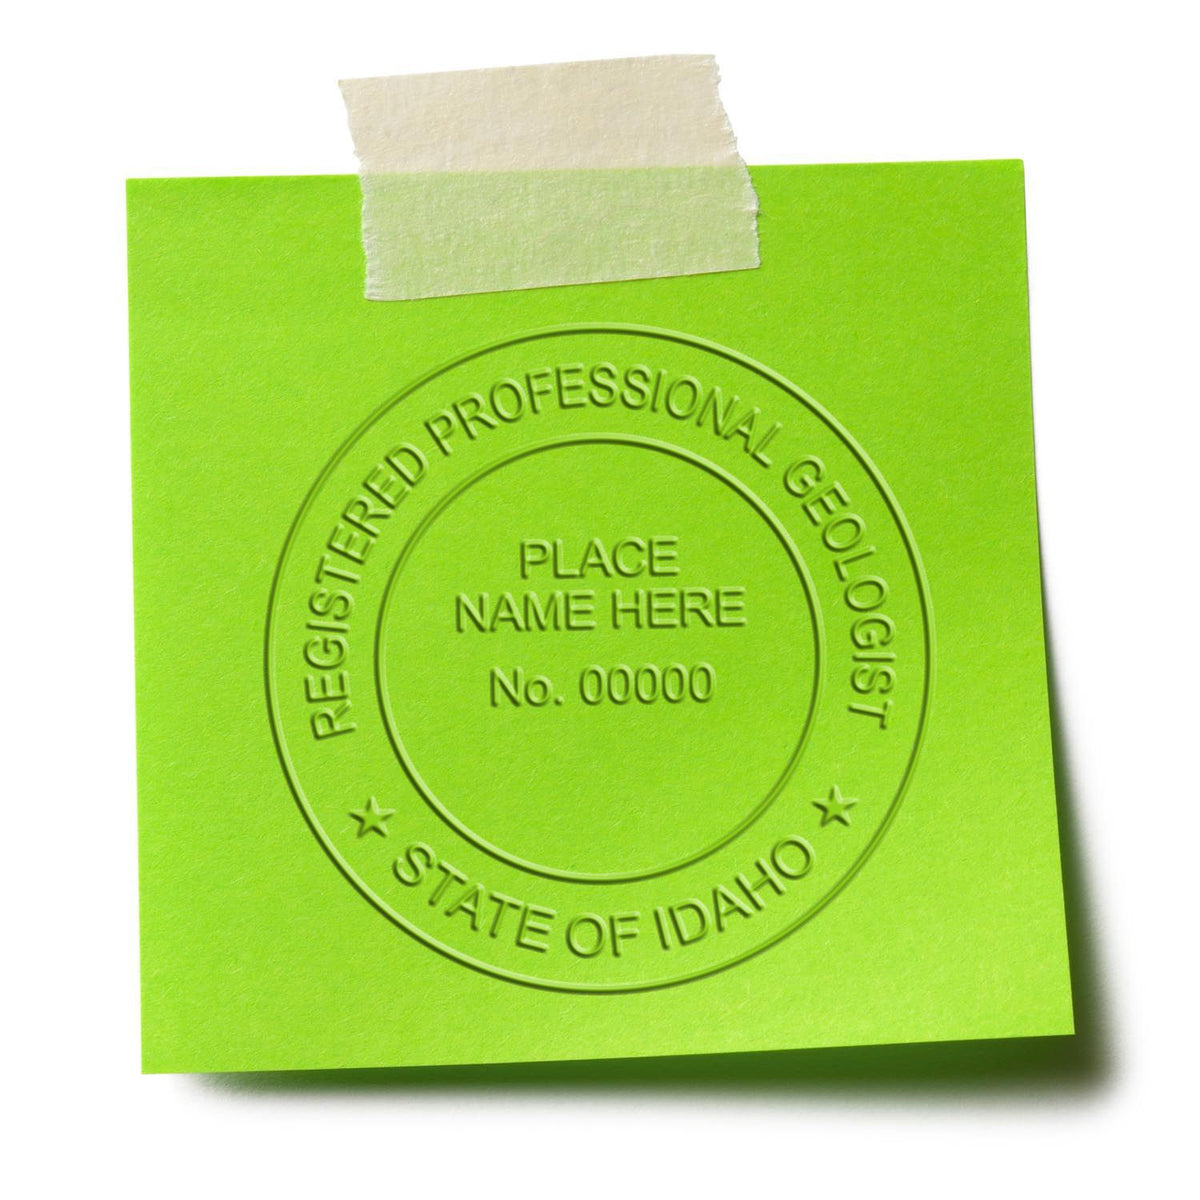 An in use photo of the State of Idaho Extended Long Reach Geologist Seal showing a sample imprint on a cardstock